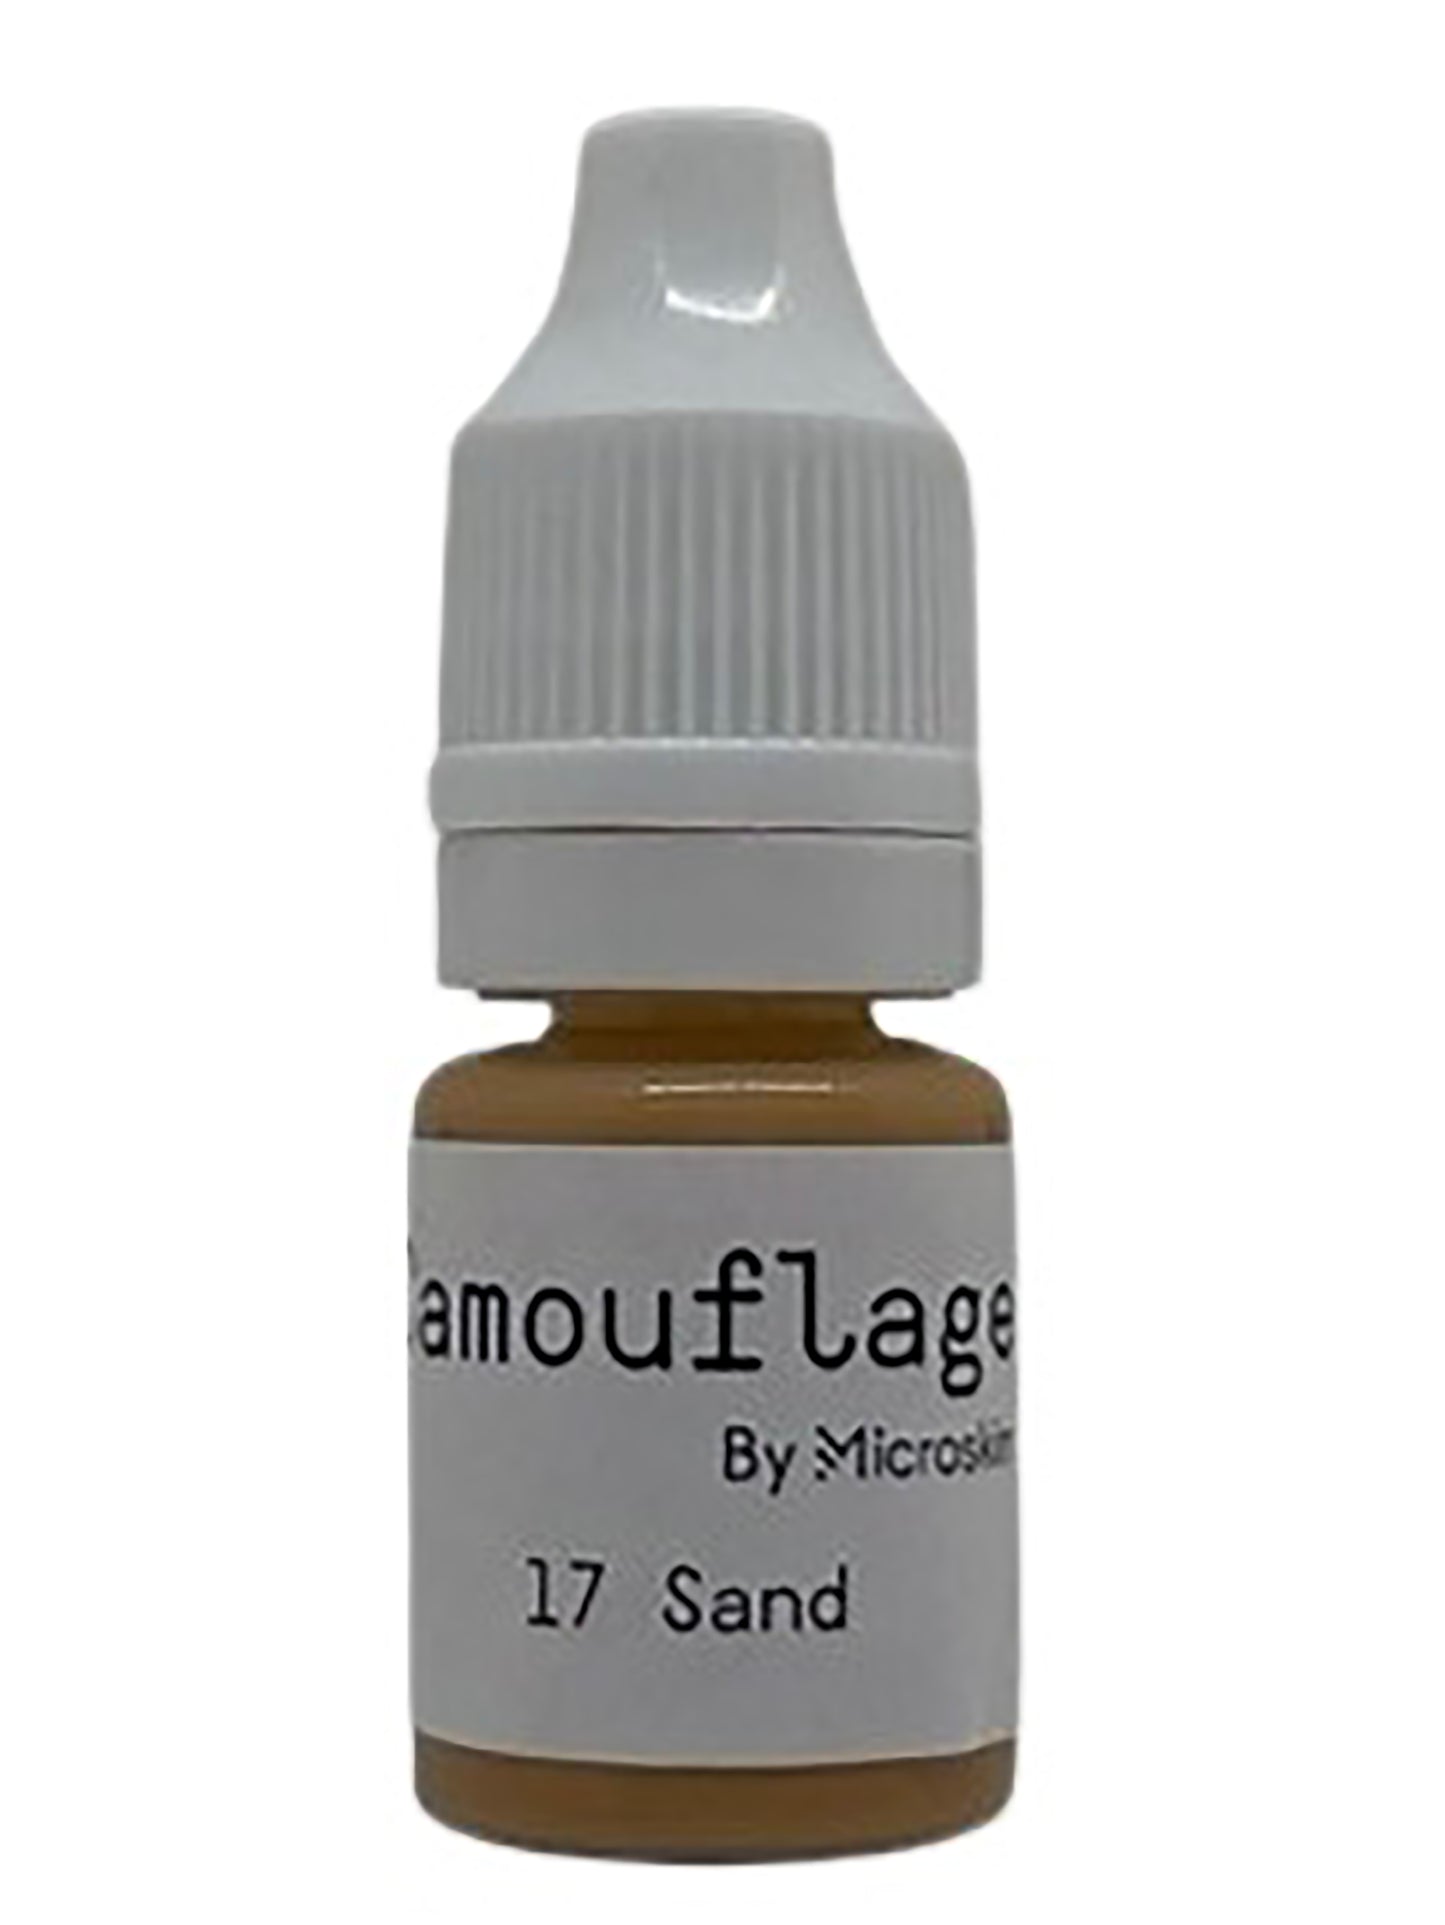 5mL Sample Pack : Your Perfect Introduction!